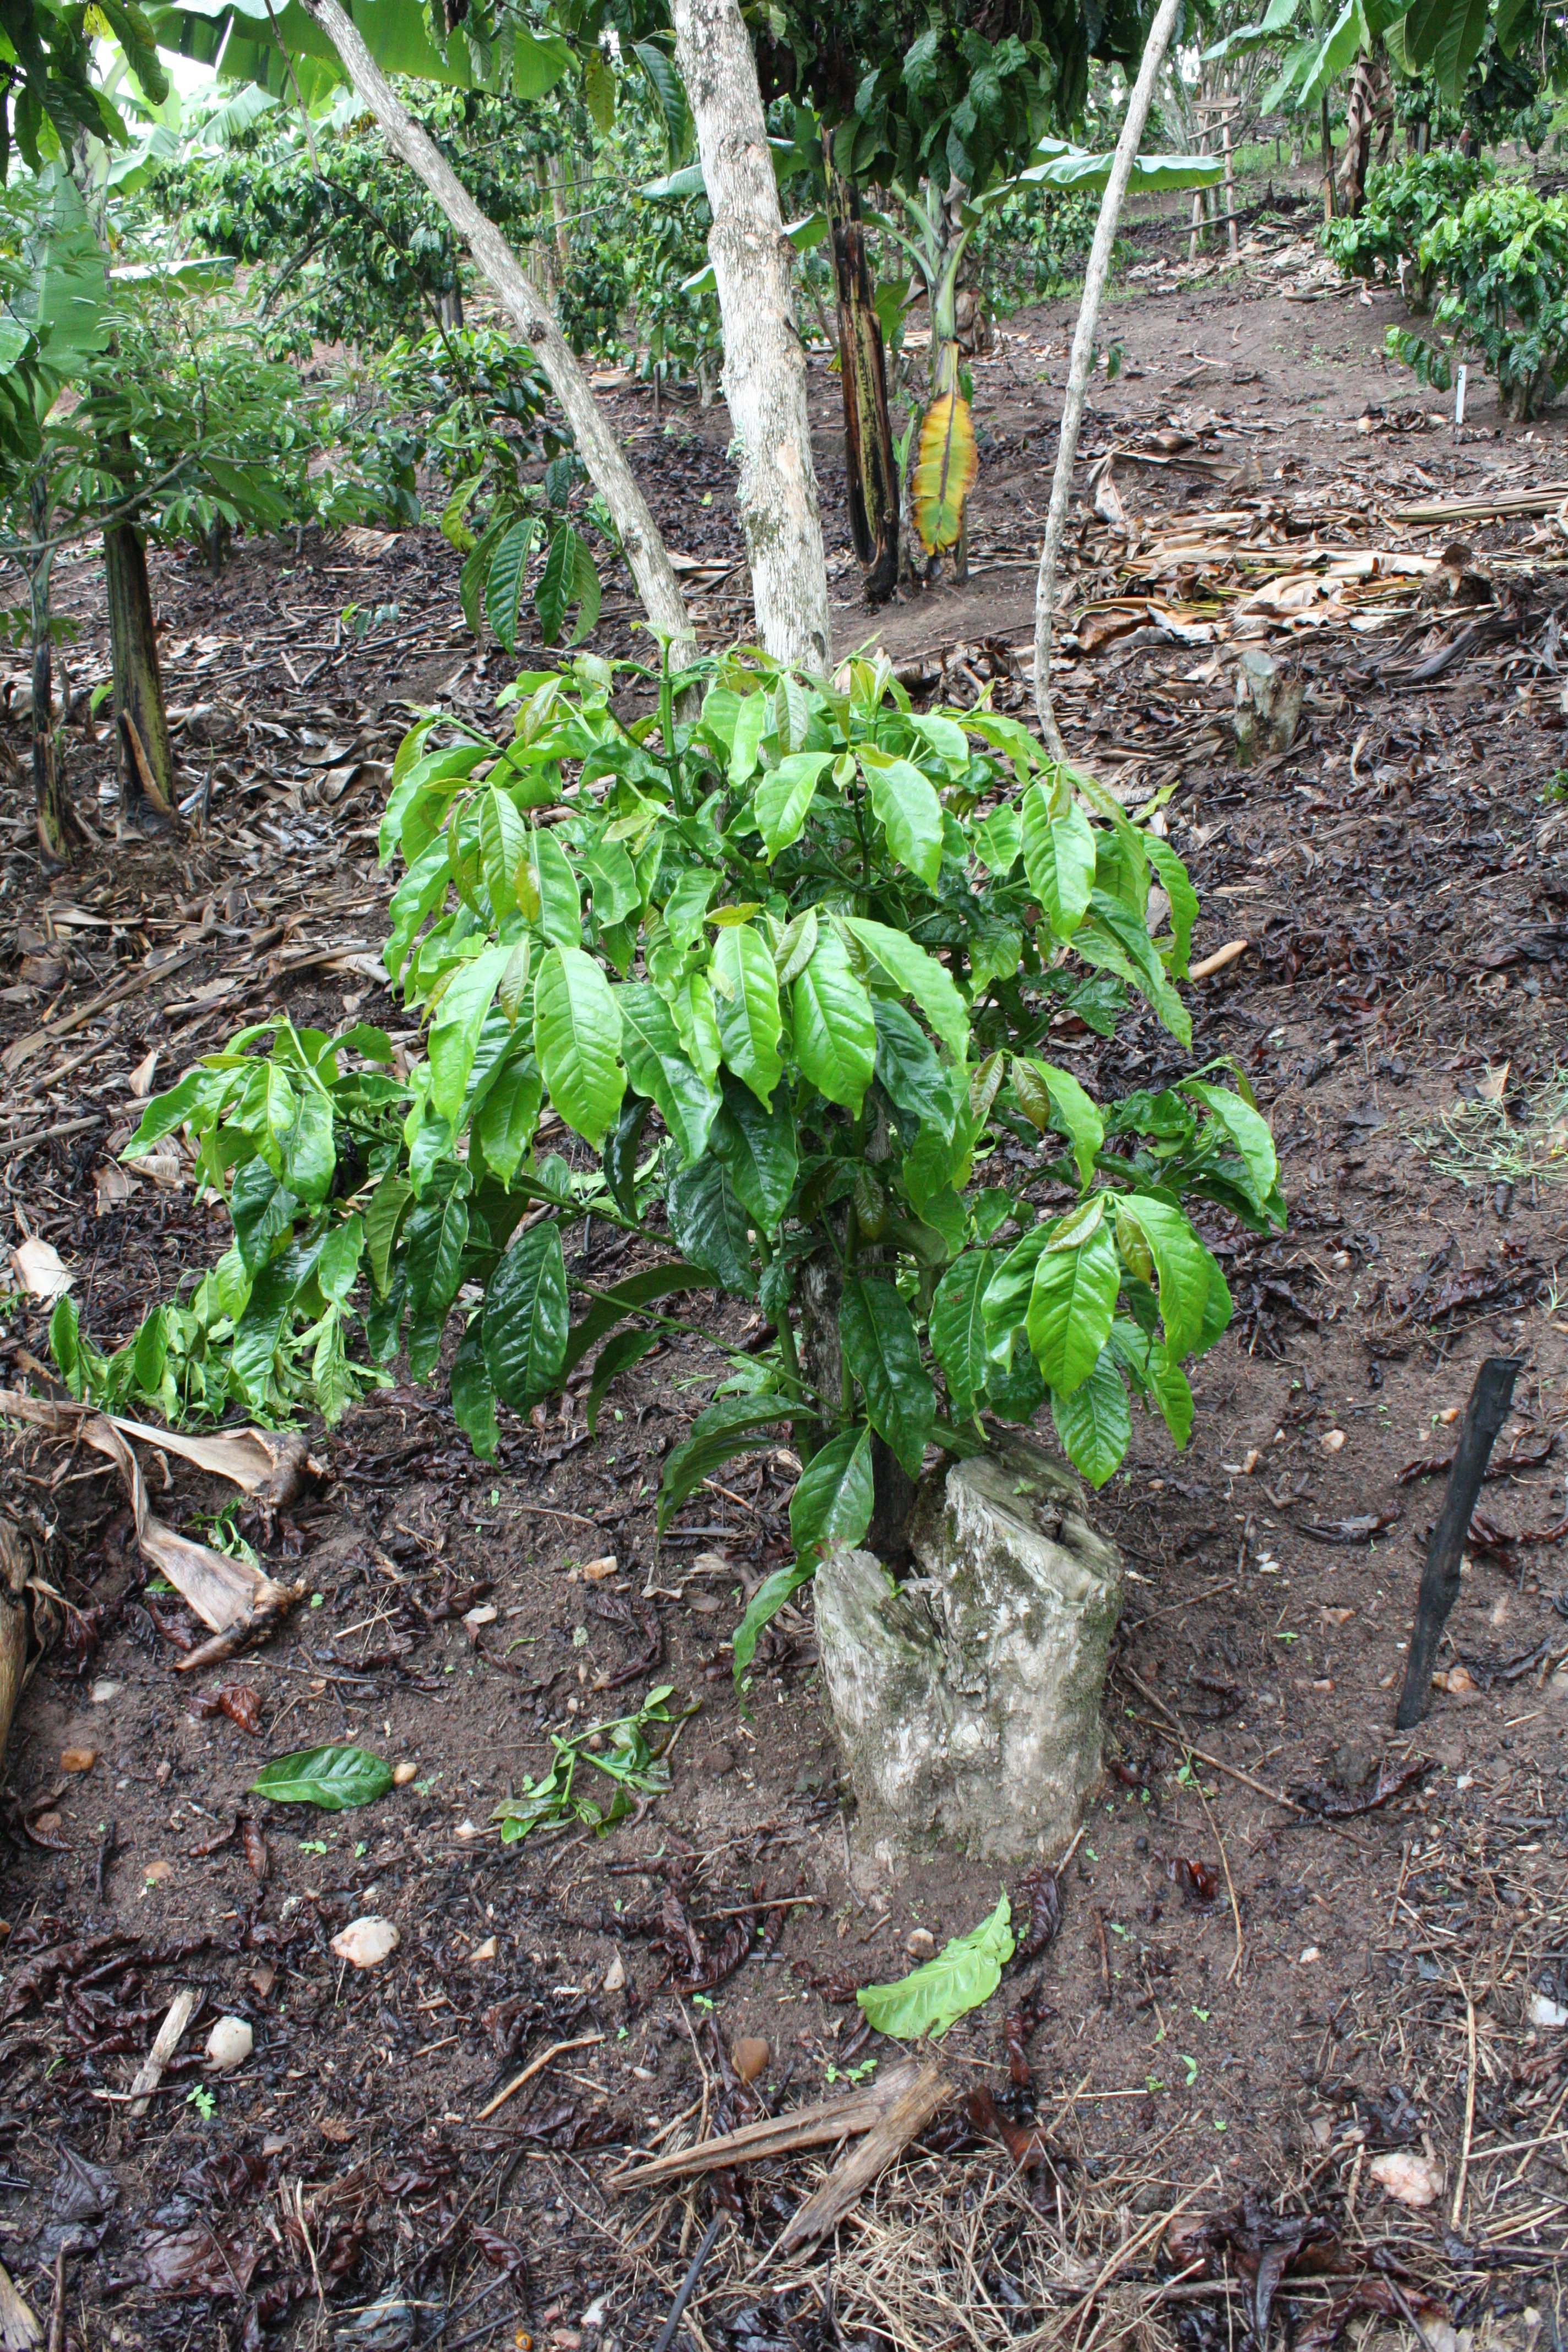 A stumped coffee tree growing back stronger